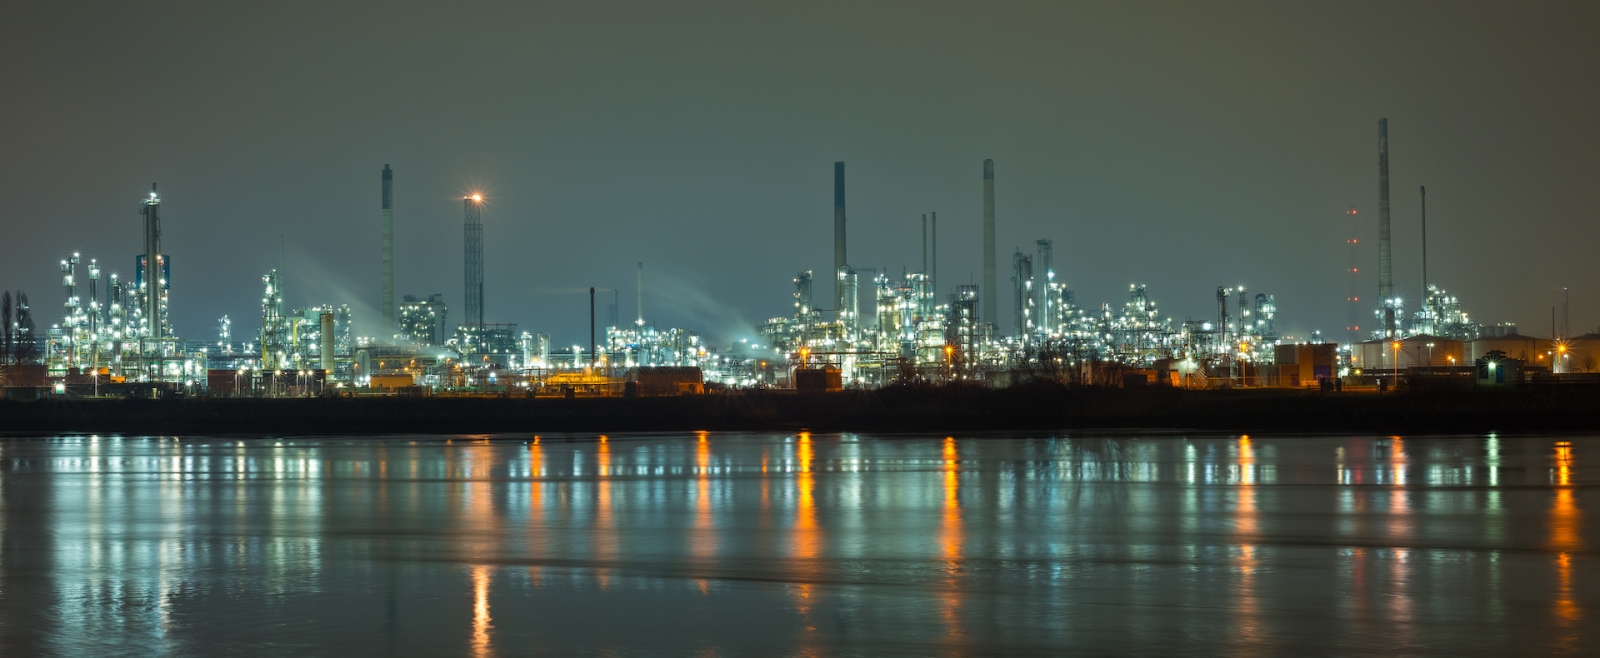 Panorama of petrochemical industry in Rotterdam, Netherlands at night